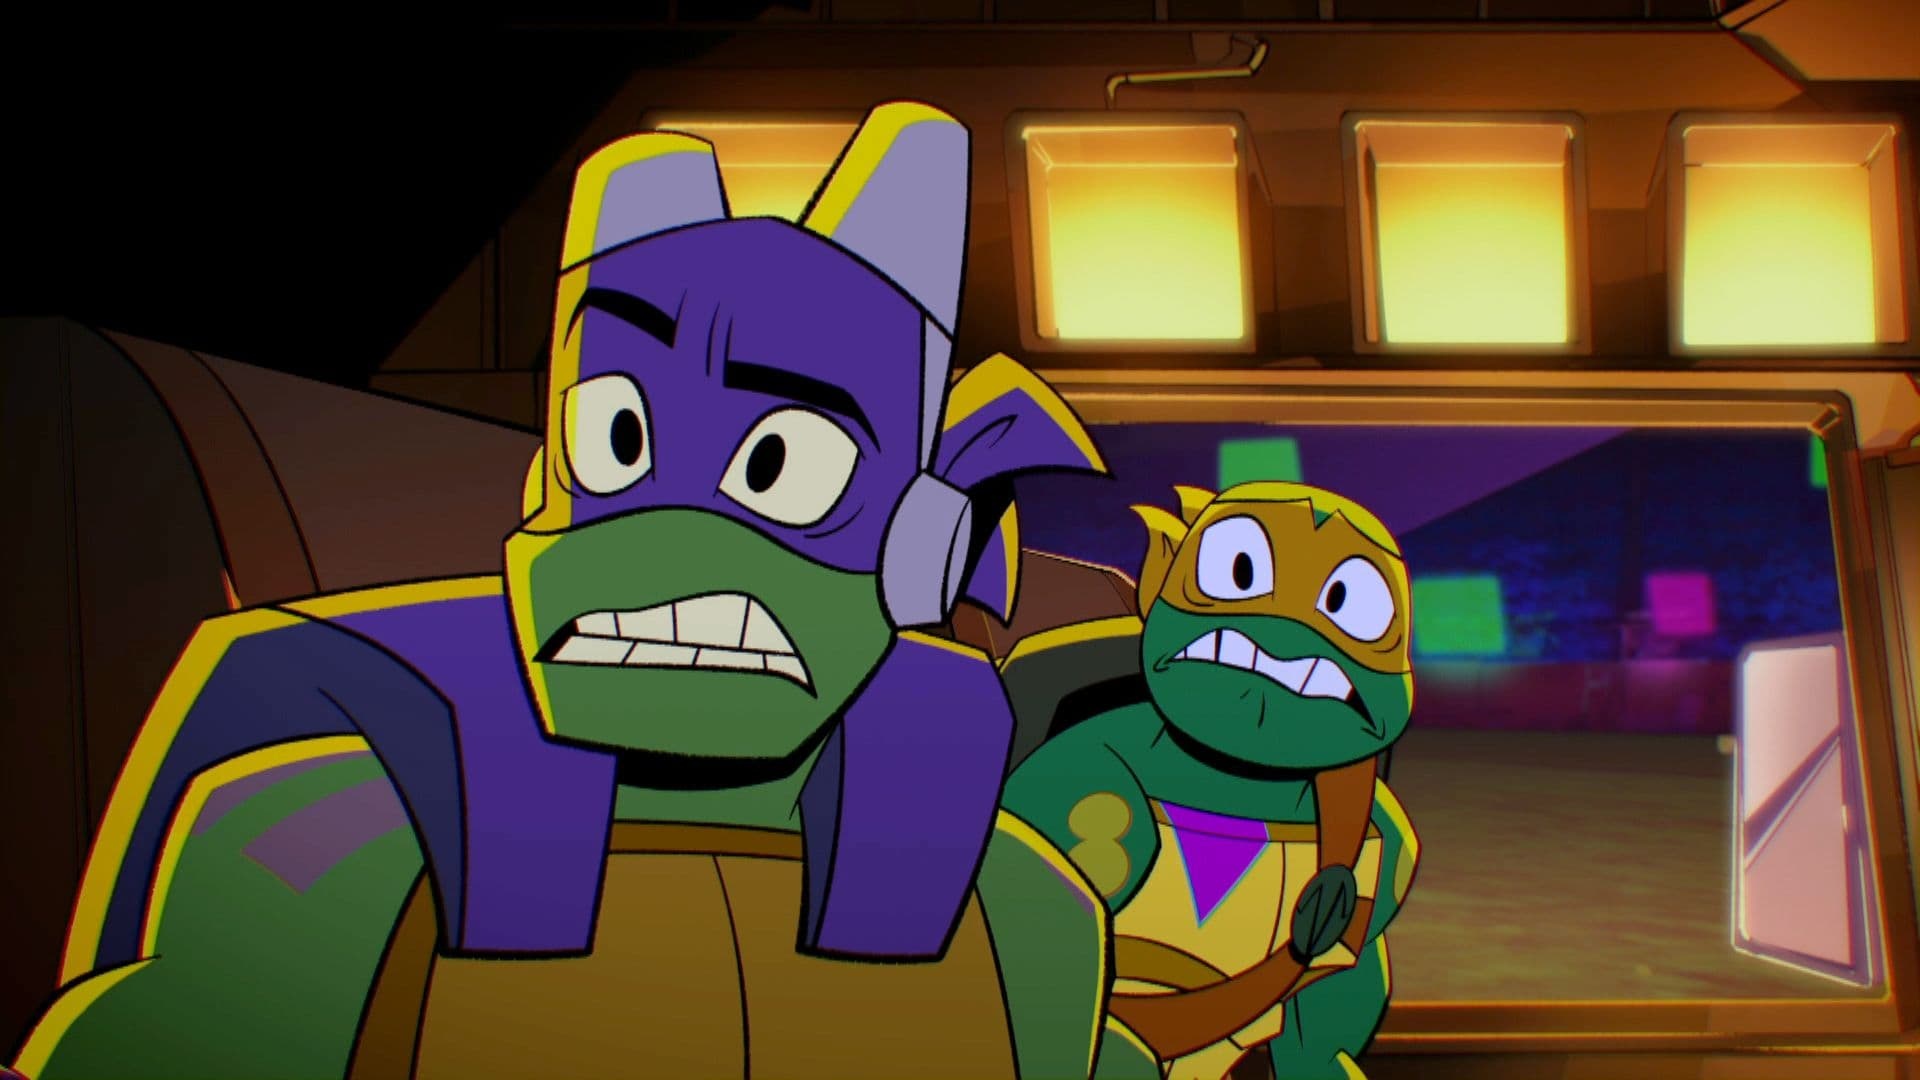 Rise of the Teenage Mutant Ninja Turtles episode, Exciting episode 22, Action-packed animation, thrilling storyline, 1920x1080 Full HD Desktop